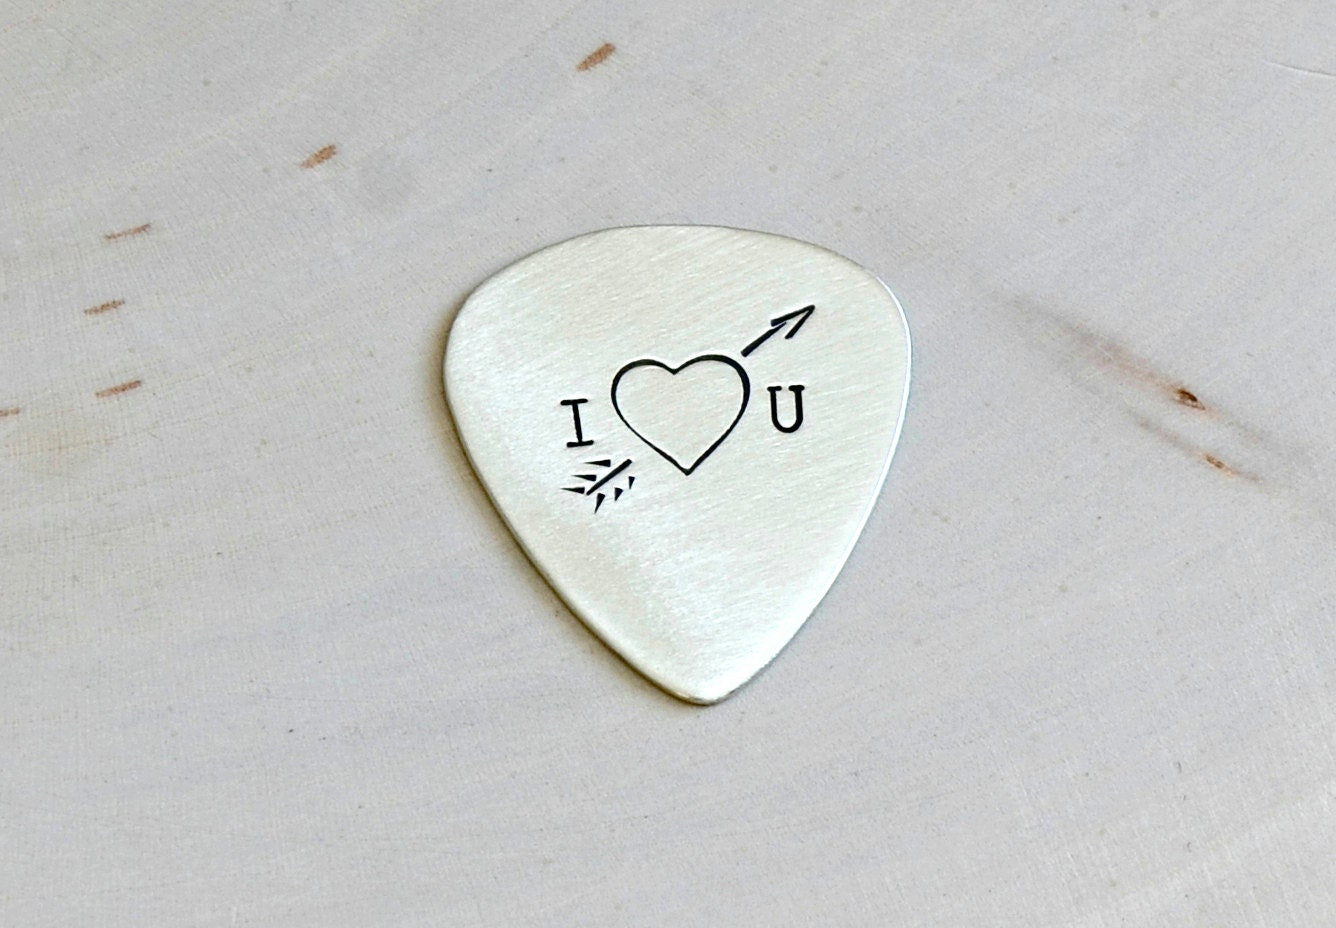 Heart and arrow theme on sterling silver guitar pick